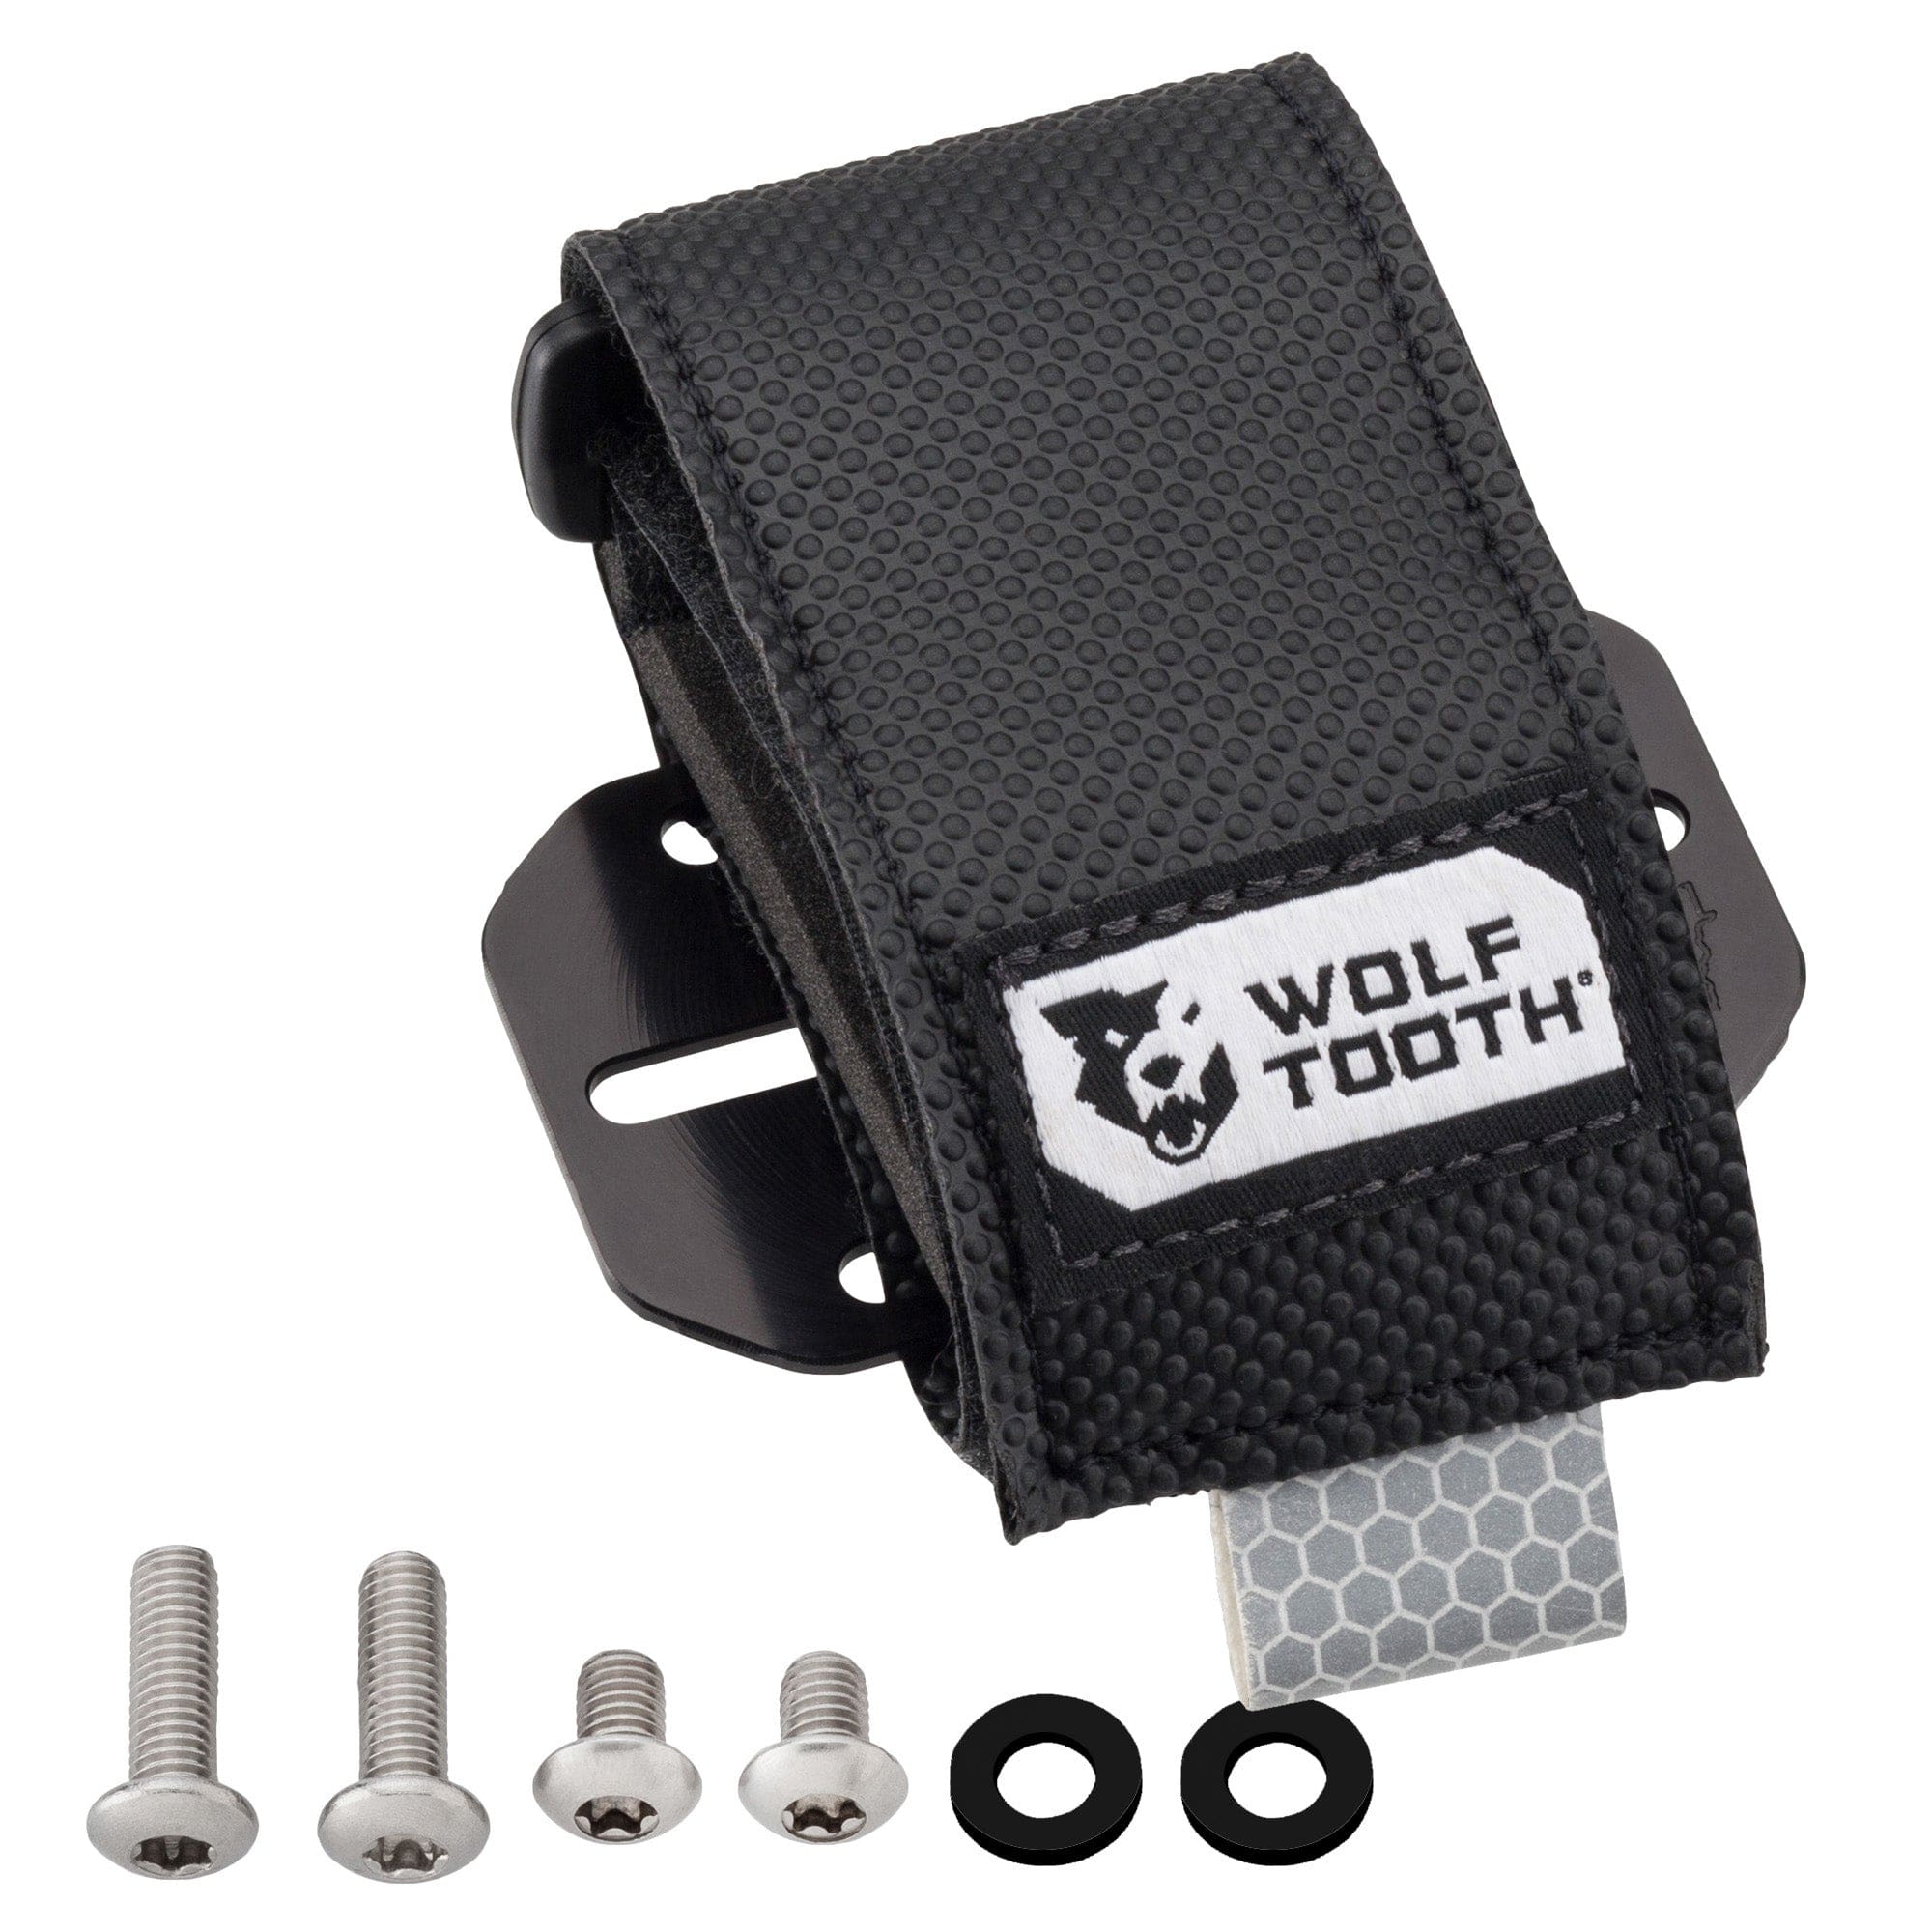 https://www.wolftoothcomponents.com/cdn/shop/products/WT-Accessory-Strap-and-Plate-Black-03_9a42417b-fbc1-4640-a885-ce46451d7b22.jpg?v=1702123026